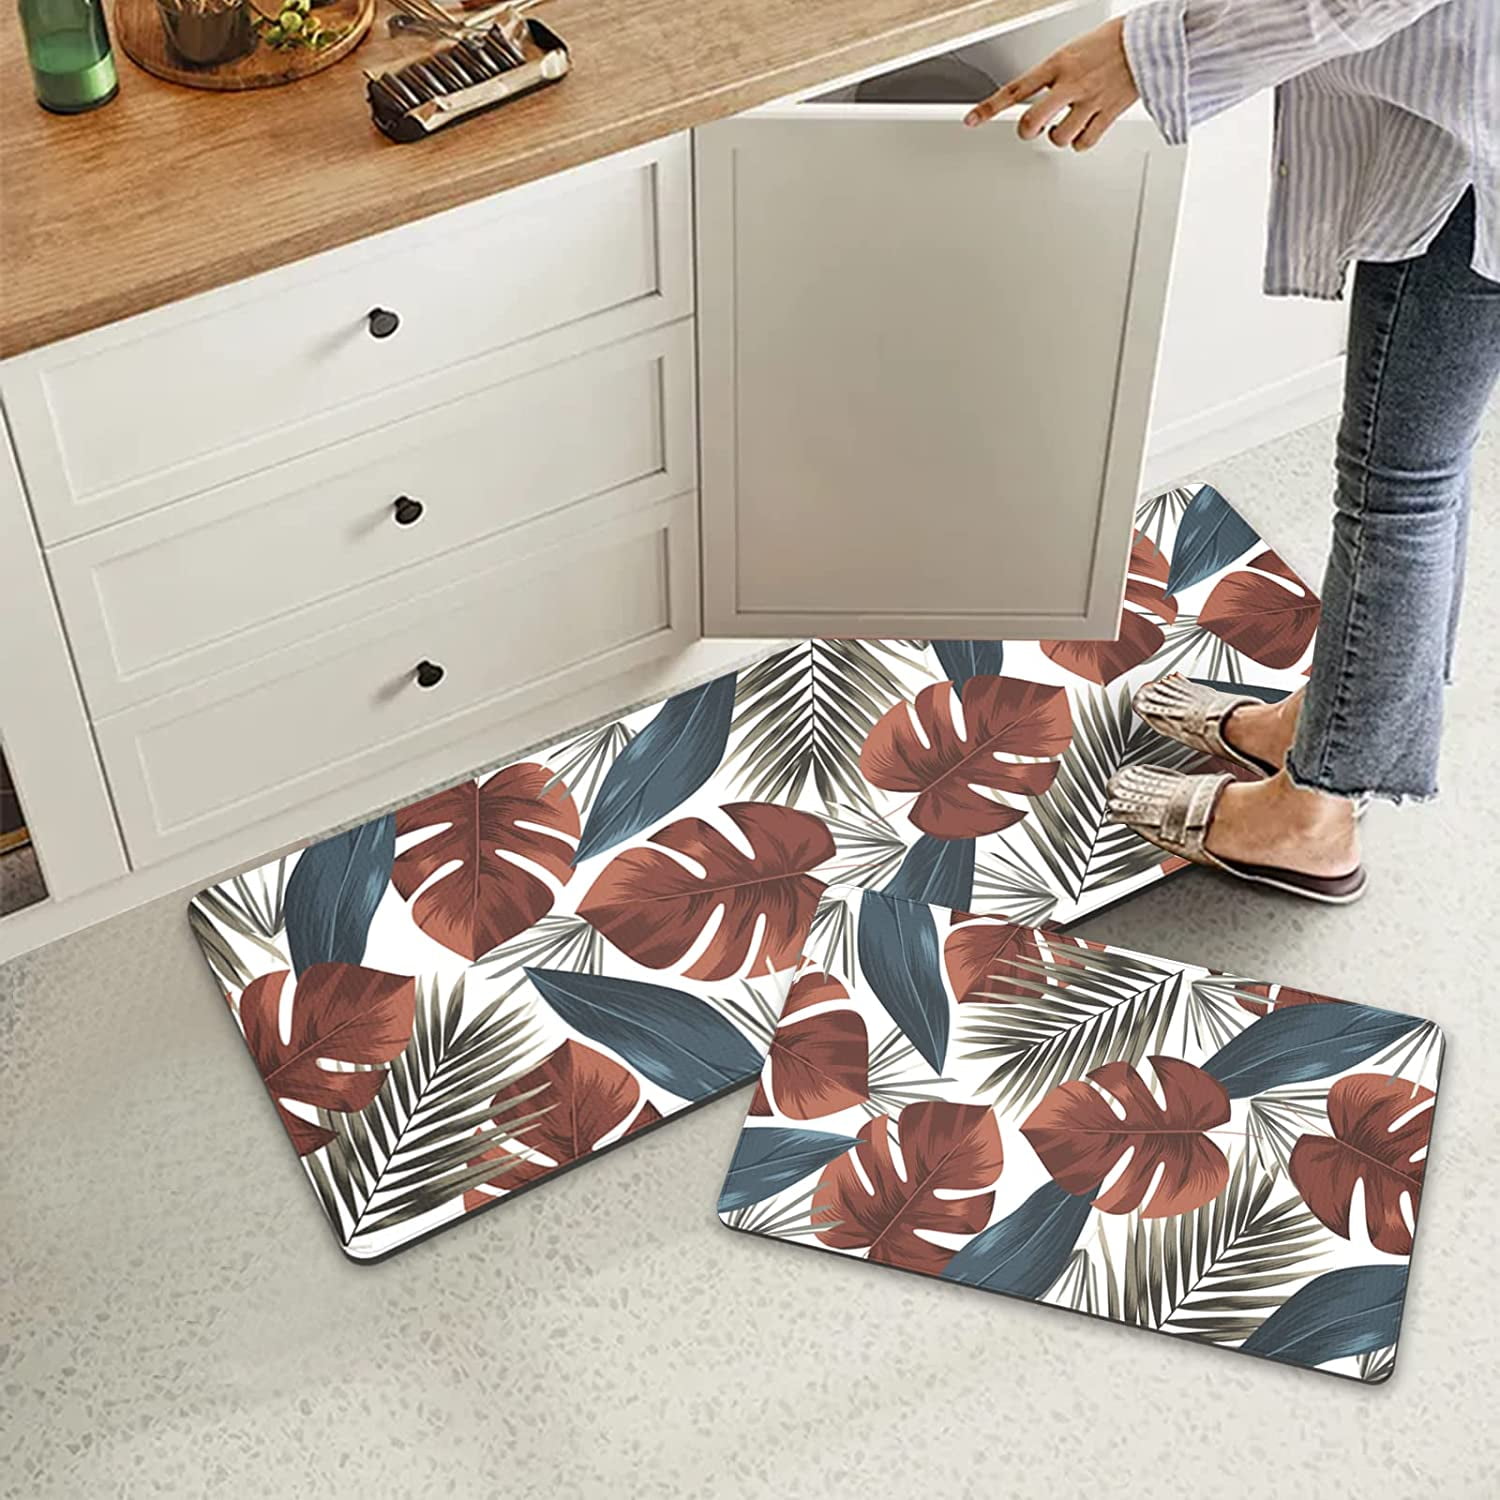 Farmhouse Kitchen Mats Sets 2 Piece Cushioned Anti-Fatigue Comfort Mat for  Home & Office Ergonomically Engineered Memory Foam Kitchen Rug Waterproof  Non-Skid, 30 by 17 + 47 by 17,Sunflower